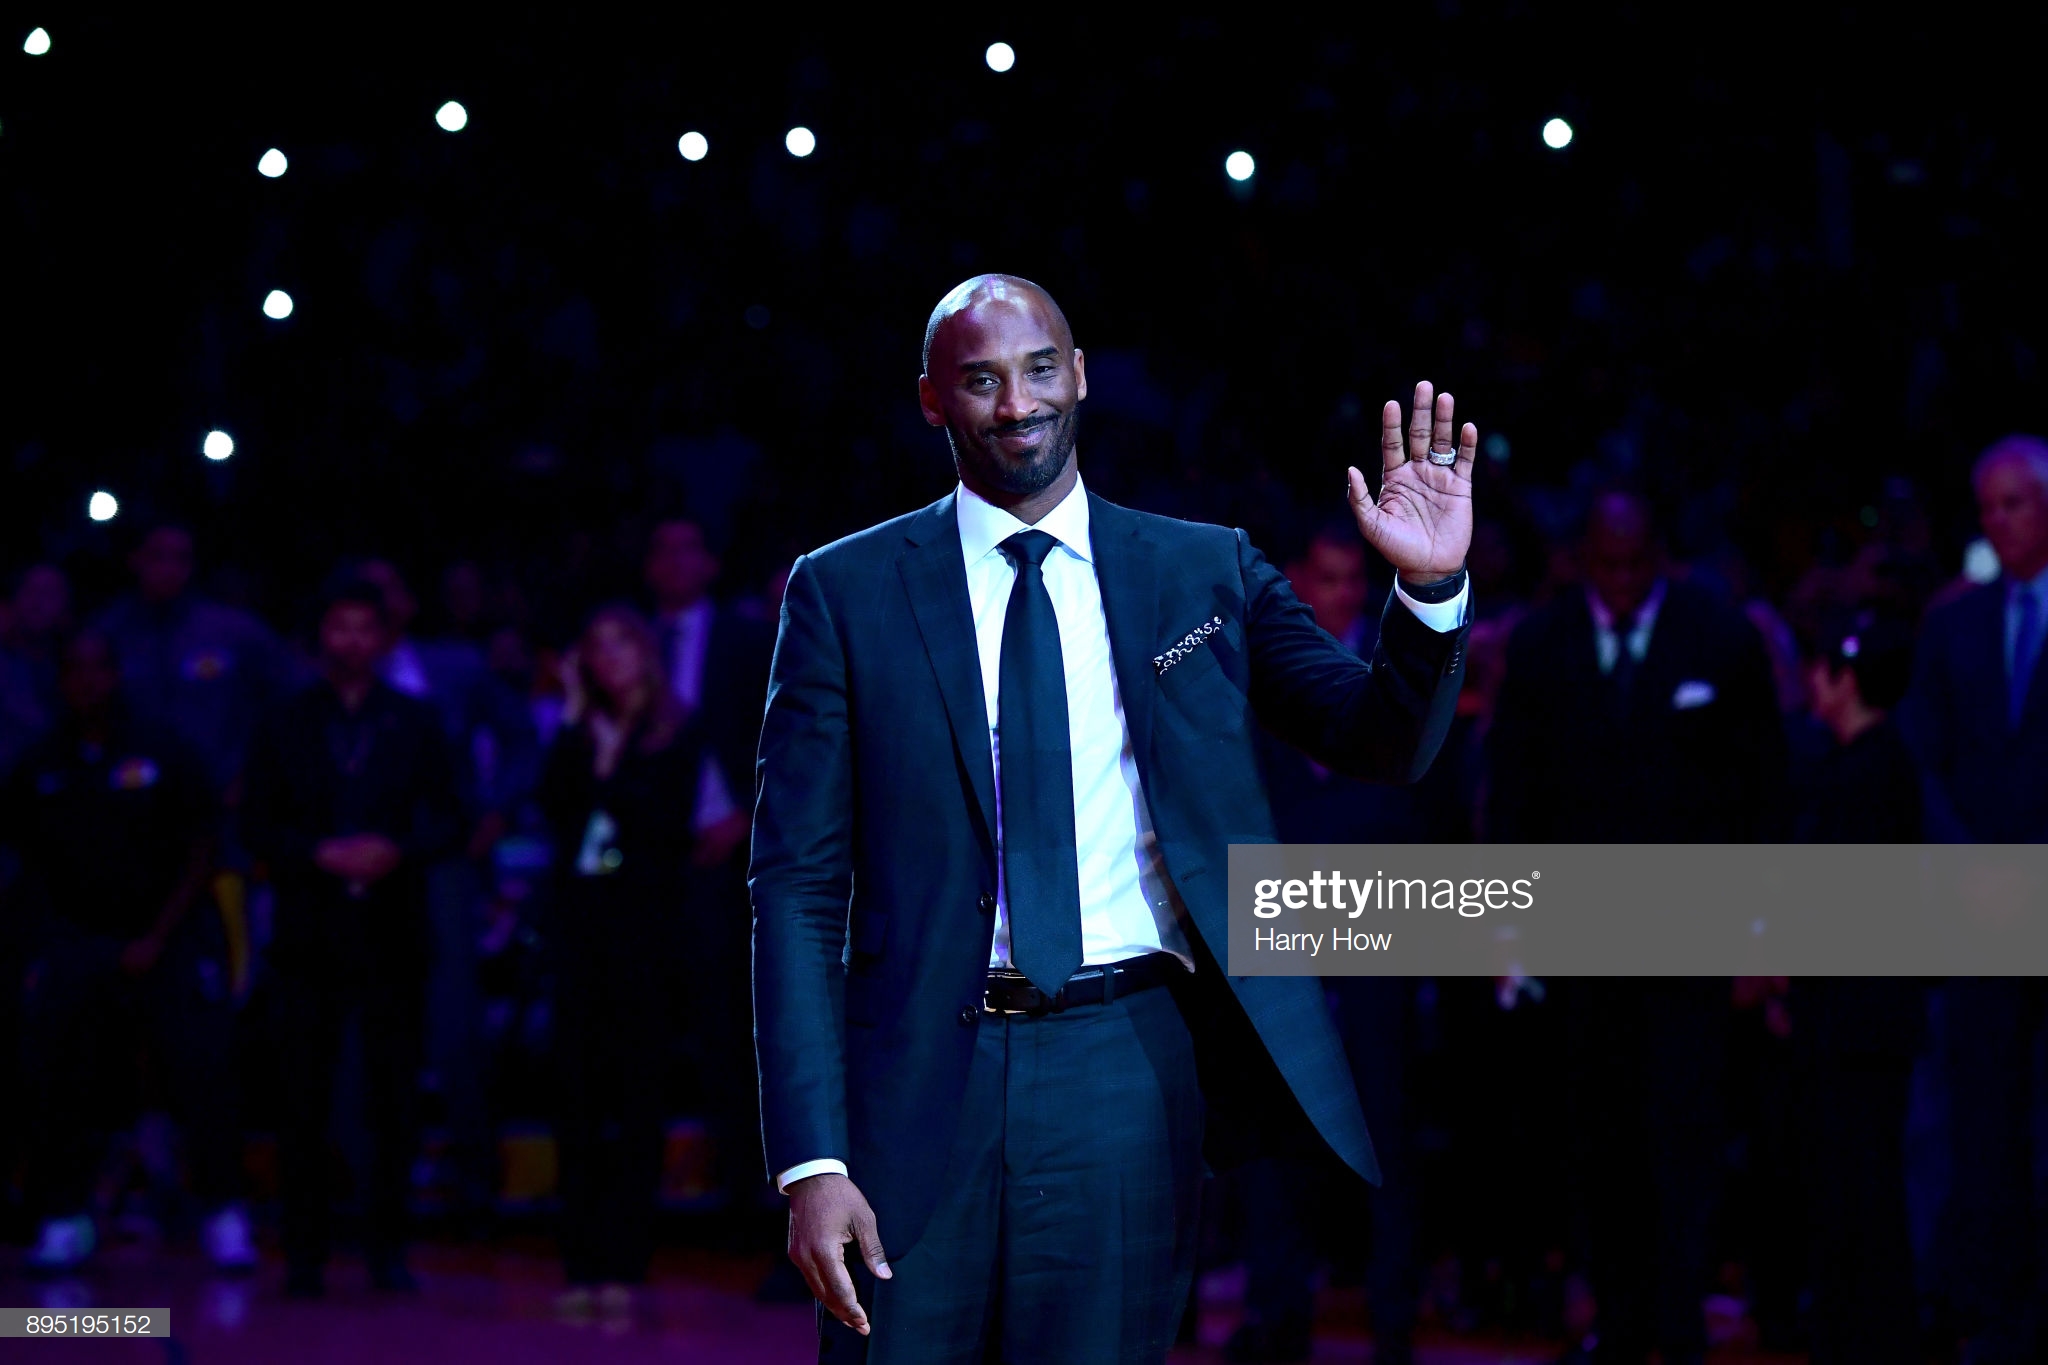 LOS ANGELES, CA - DECEMBER 18:  Kobe Bryant smiles at halftime as both his #8 and #24 Los Angeles Lakers jerseys are retired at Staples Center on December 18, 2017 in Los Angeles, California. NOTE TO USER: User expressly acknowledges and agrees that, by downloading and or using this photograph, User is consenting to the terms and conditions of the Getty Images License Agreement.  (Photo by Harry How/Getty Images)